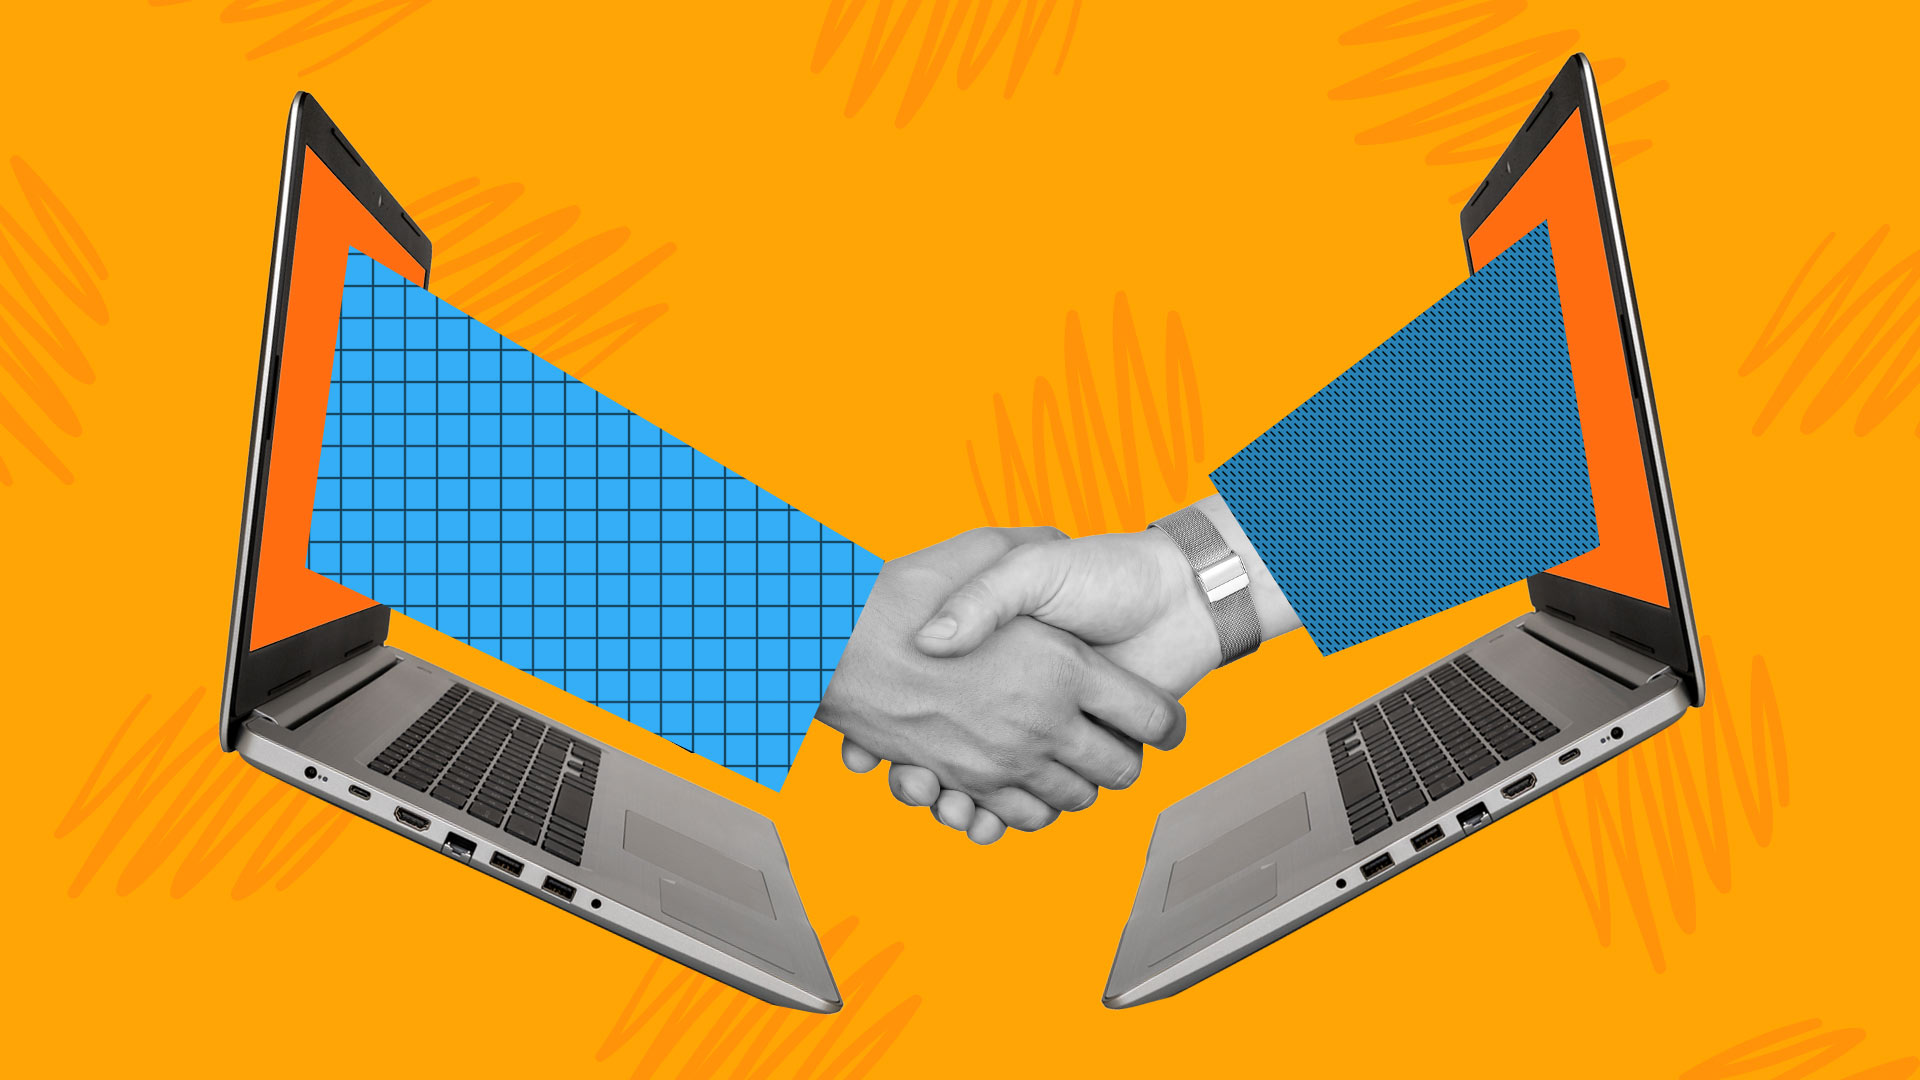 This image features two laptops. Each one has an arm coming out of it, and the two are shaking hands. This image represents working with outsourced partners for effective video creation.